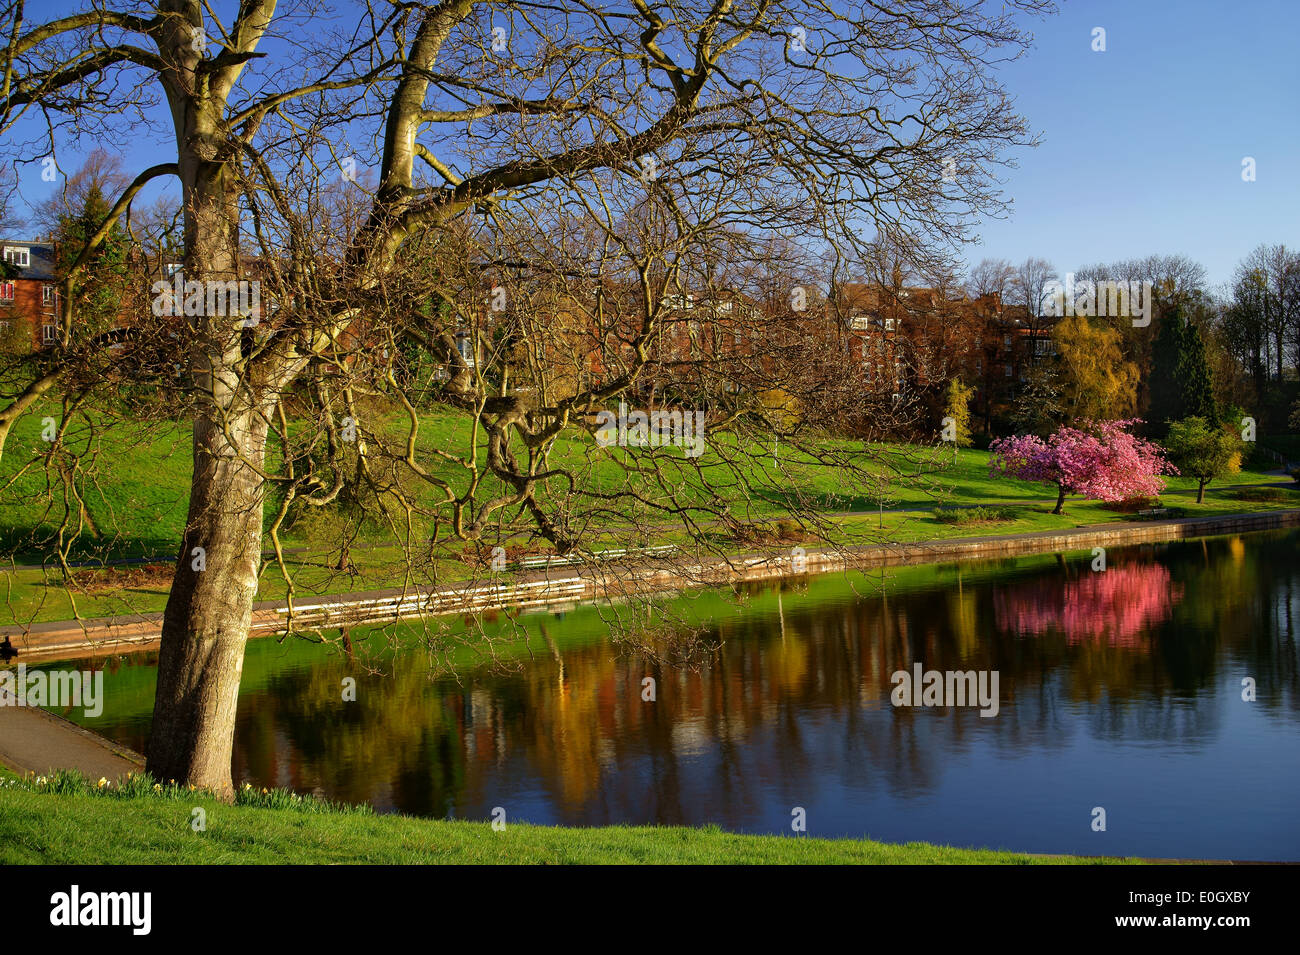 UK,South Yorkshire,Sheffield,Crookes Valley Park, Reflections of Trees & Blossum Stock Photo